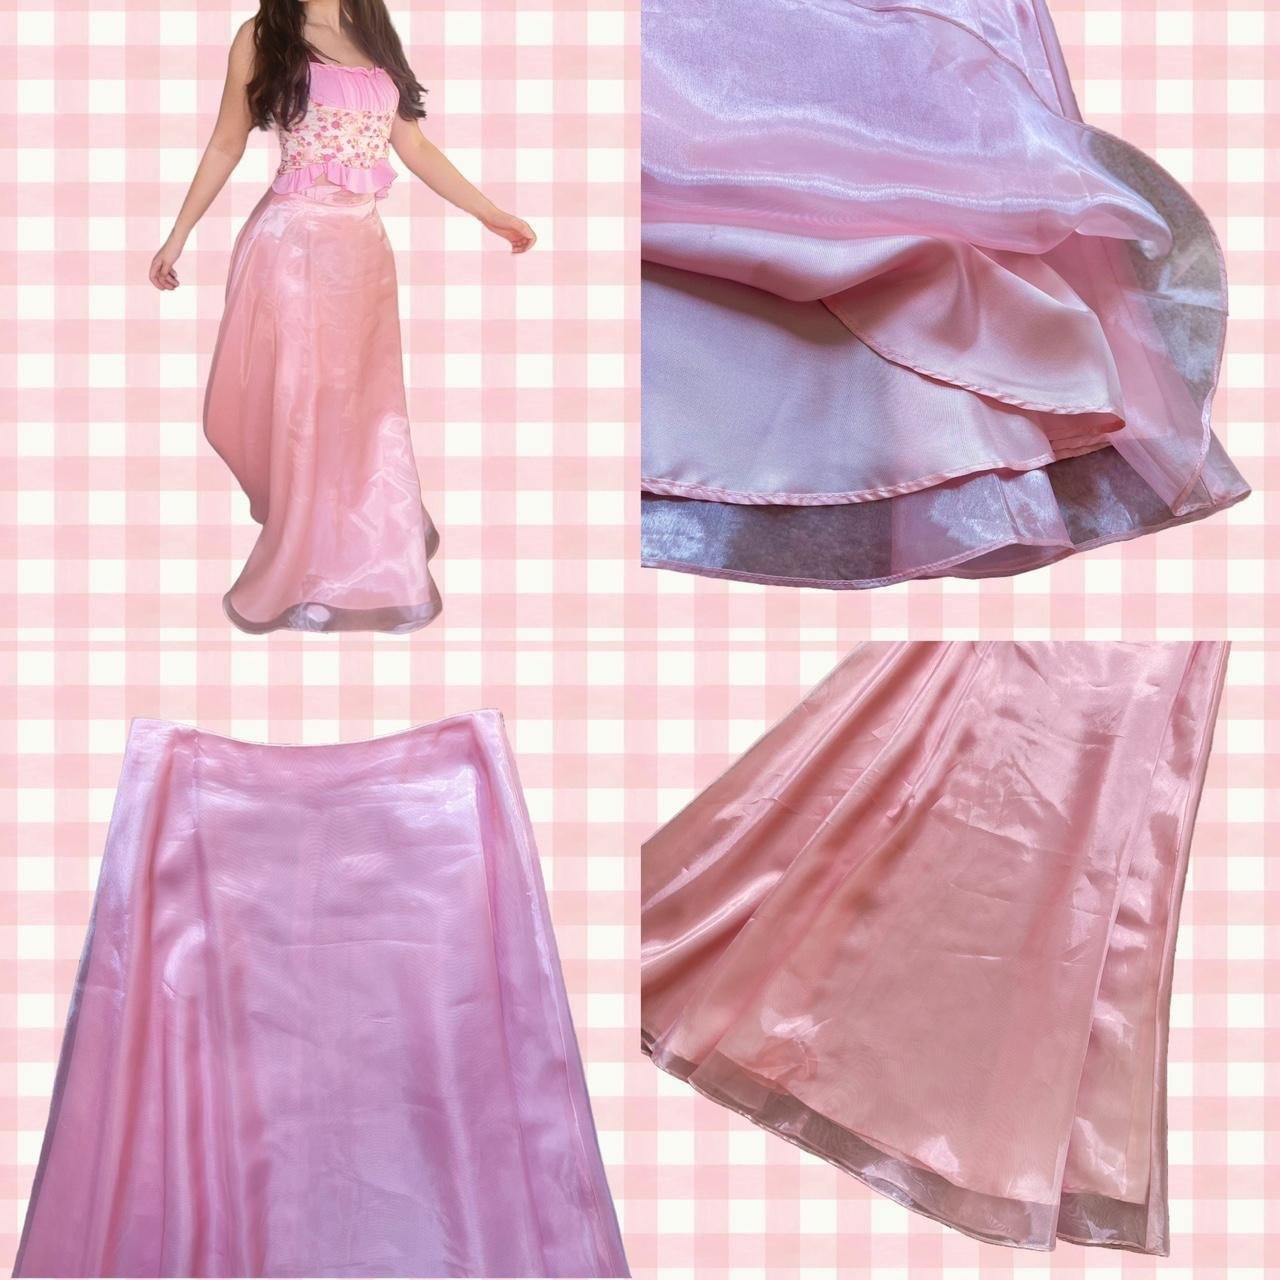 large selection True Vintage Pink Gown High Waisted Maxi Skirt IJLYIRclf Discount